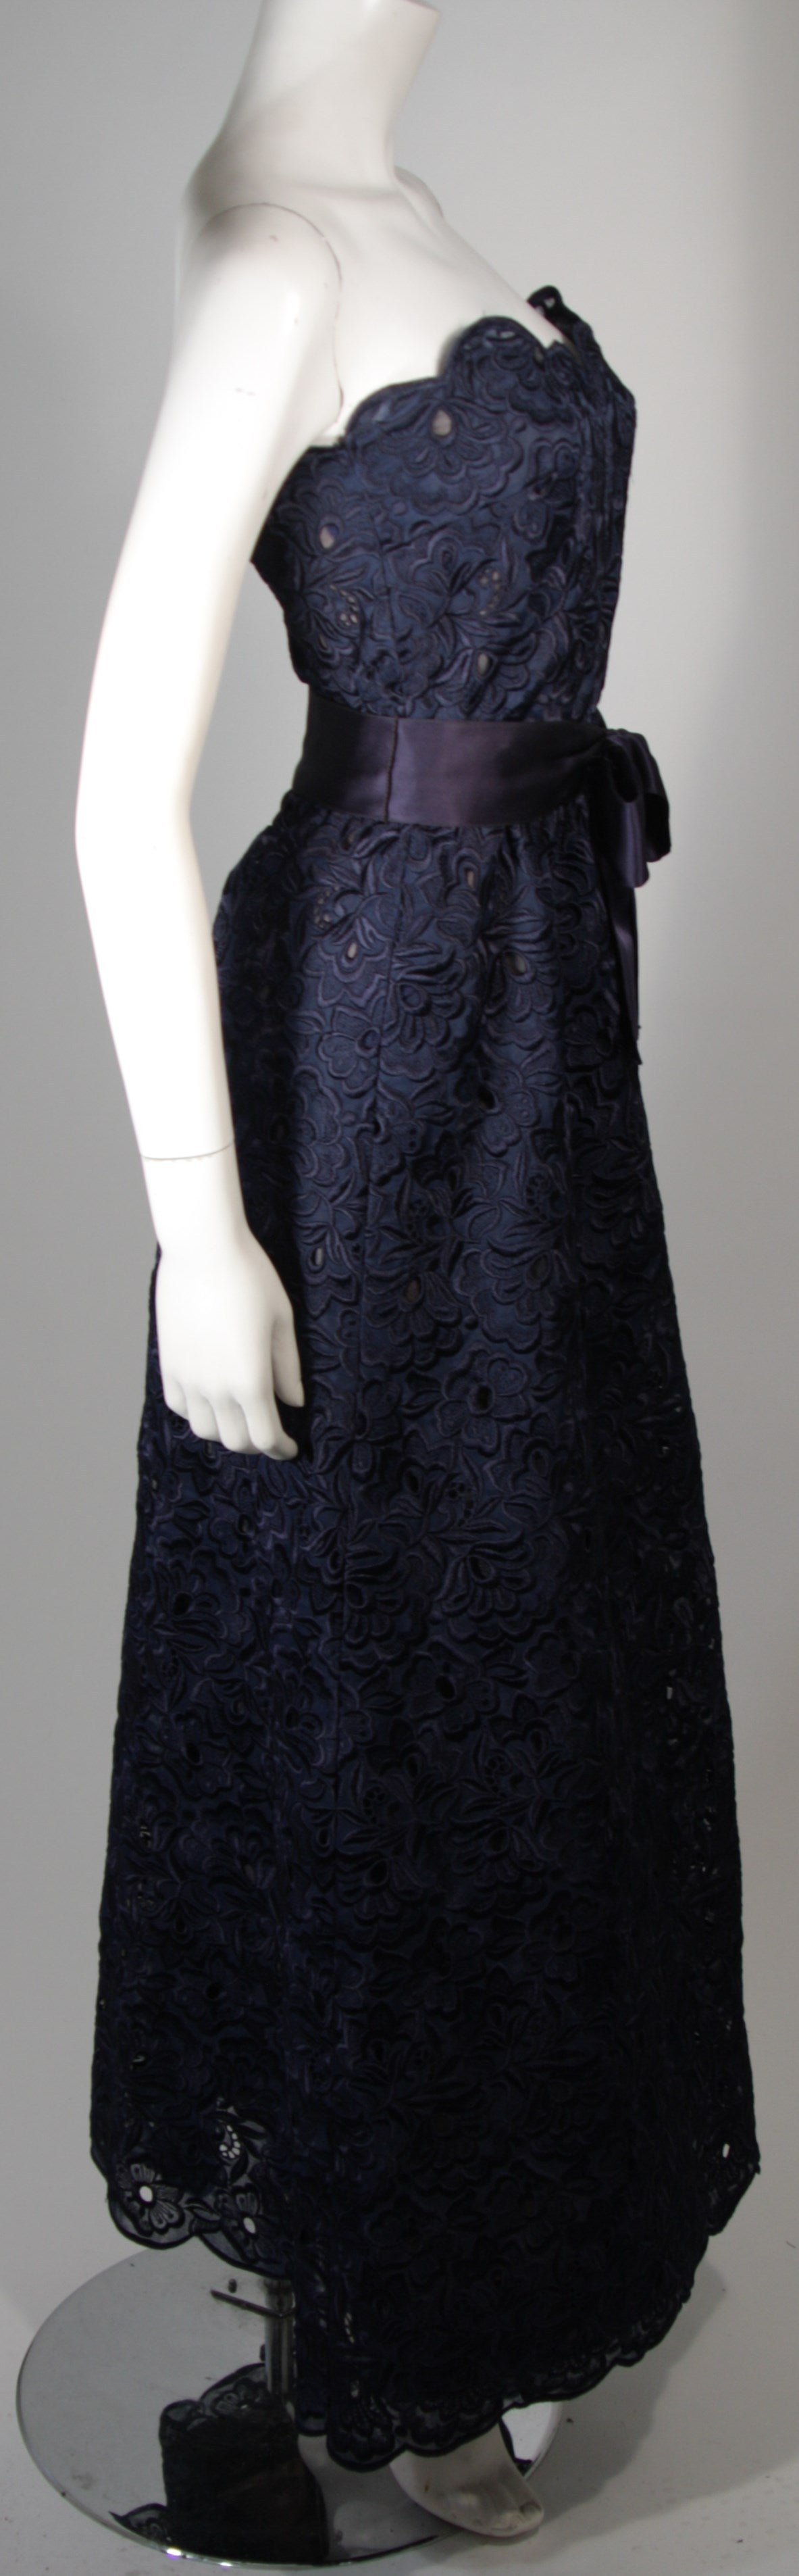 SCAASI Navy Floral Lace Evening Gown with Satin Waist Belt Size 2 For Sale 1